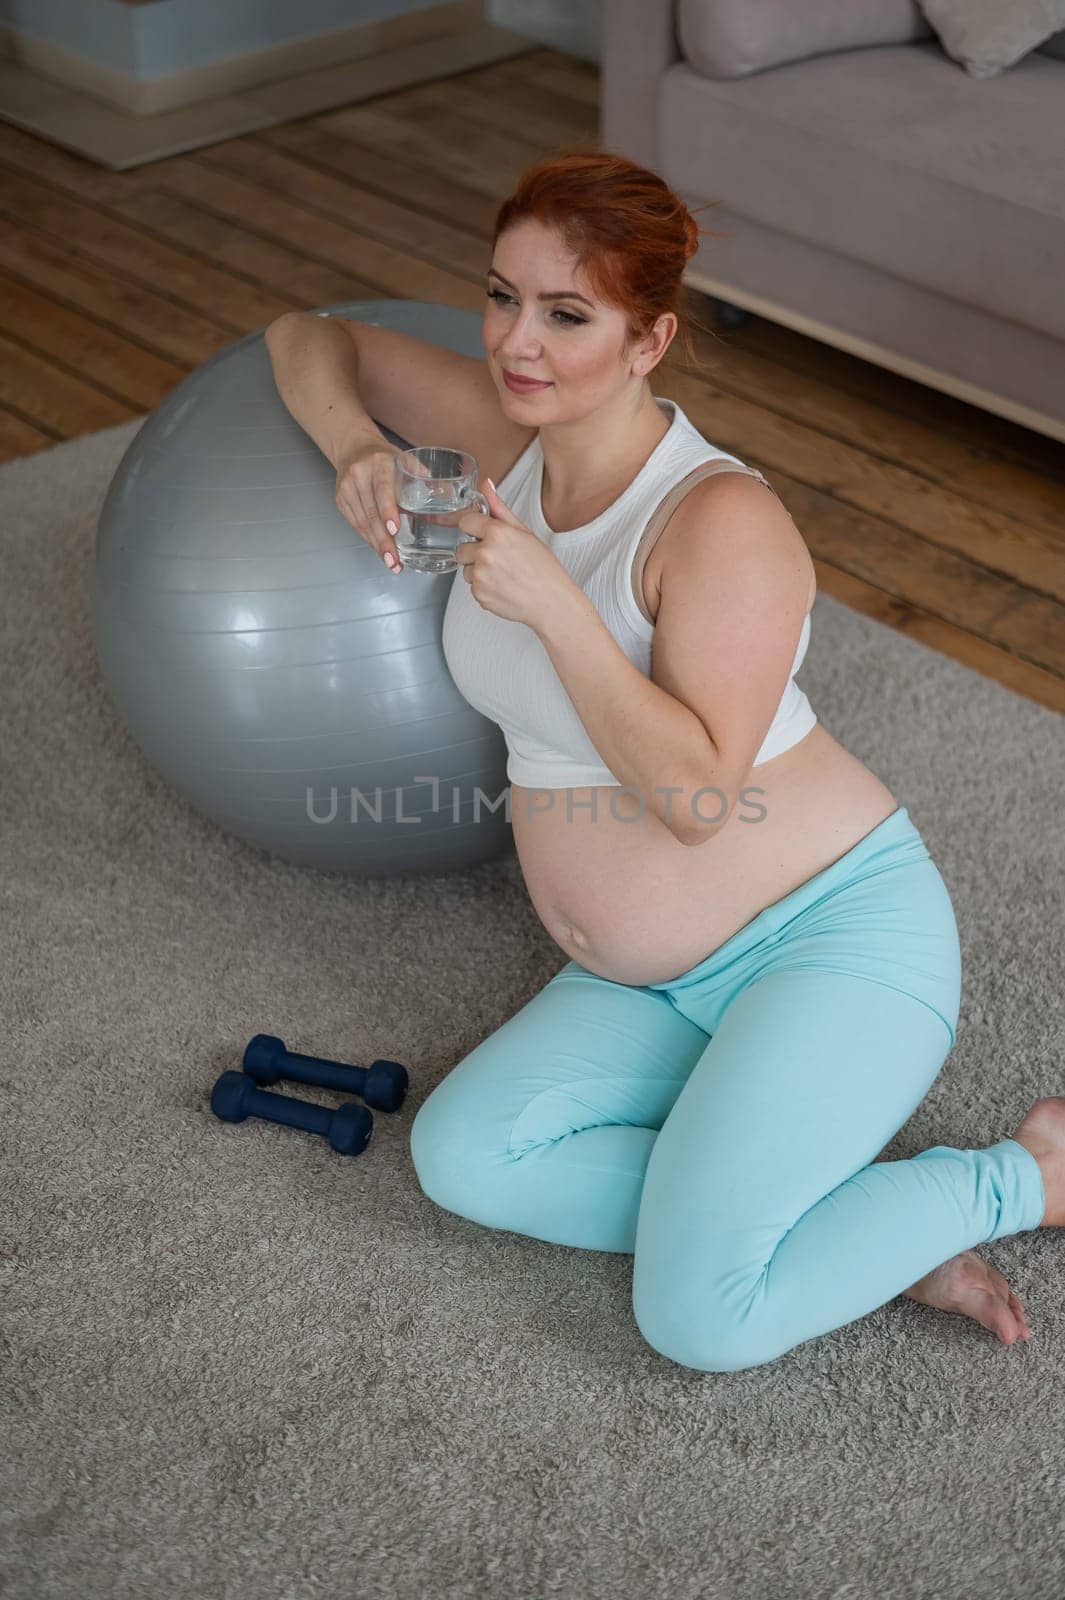 Pregnant woman drinks water after workout on fitness ball